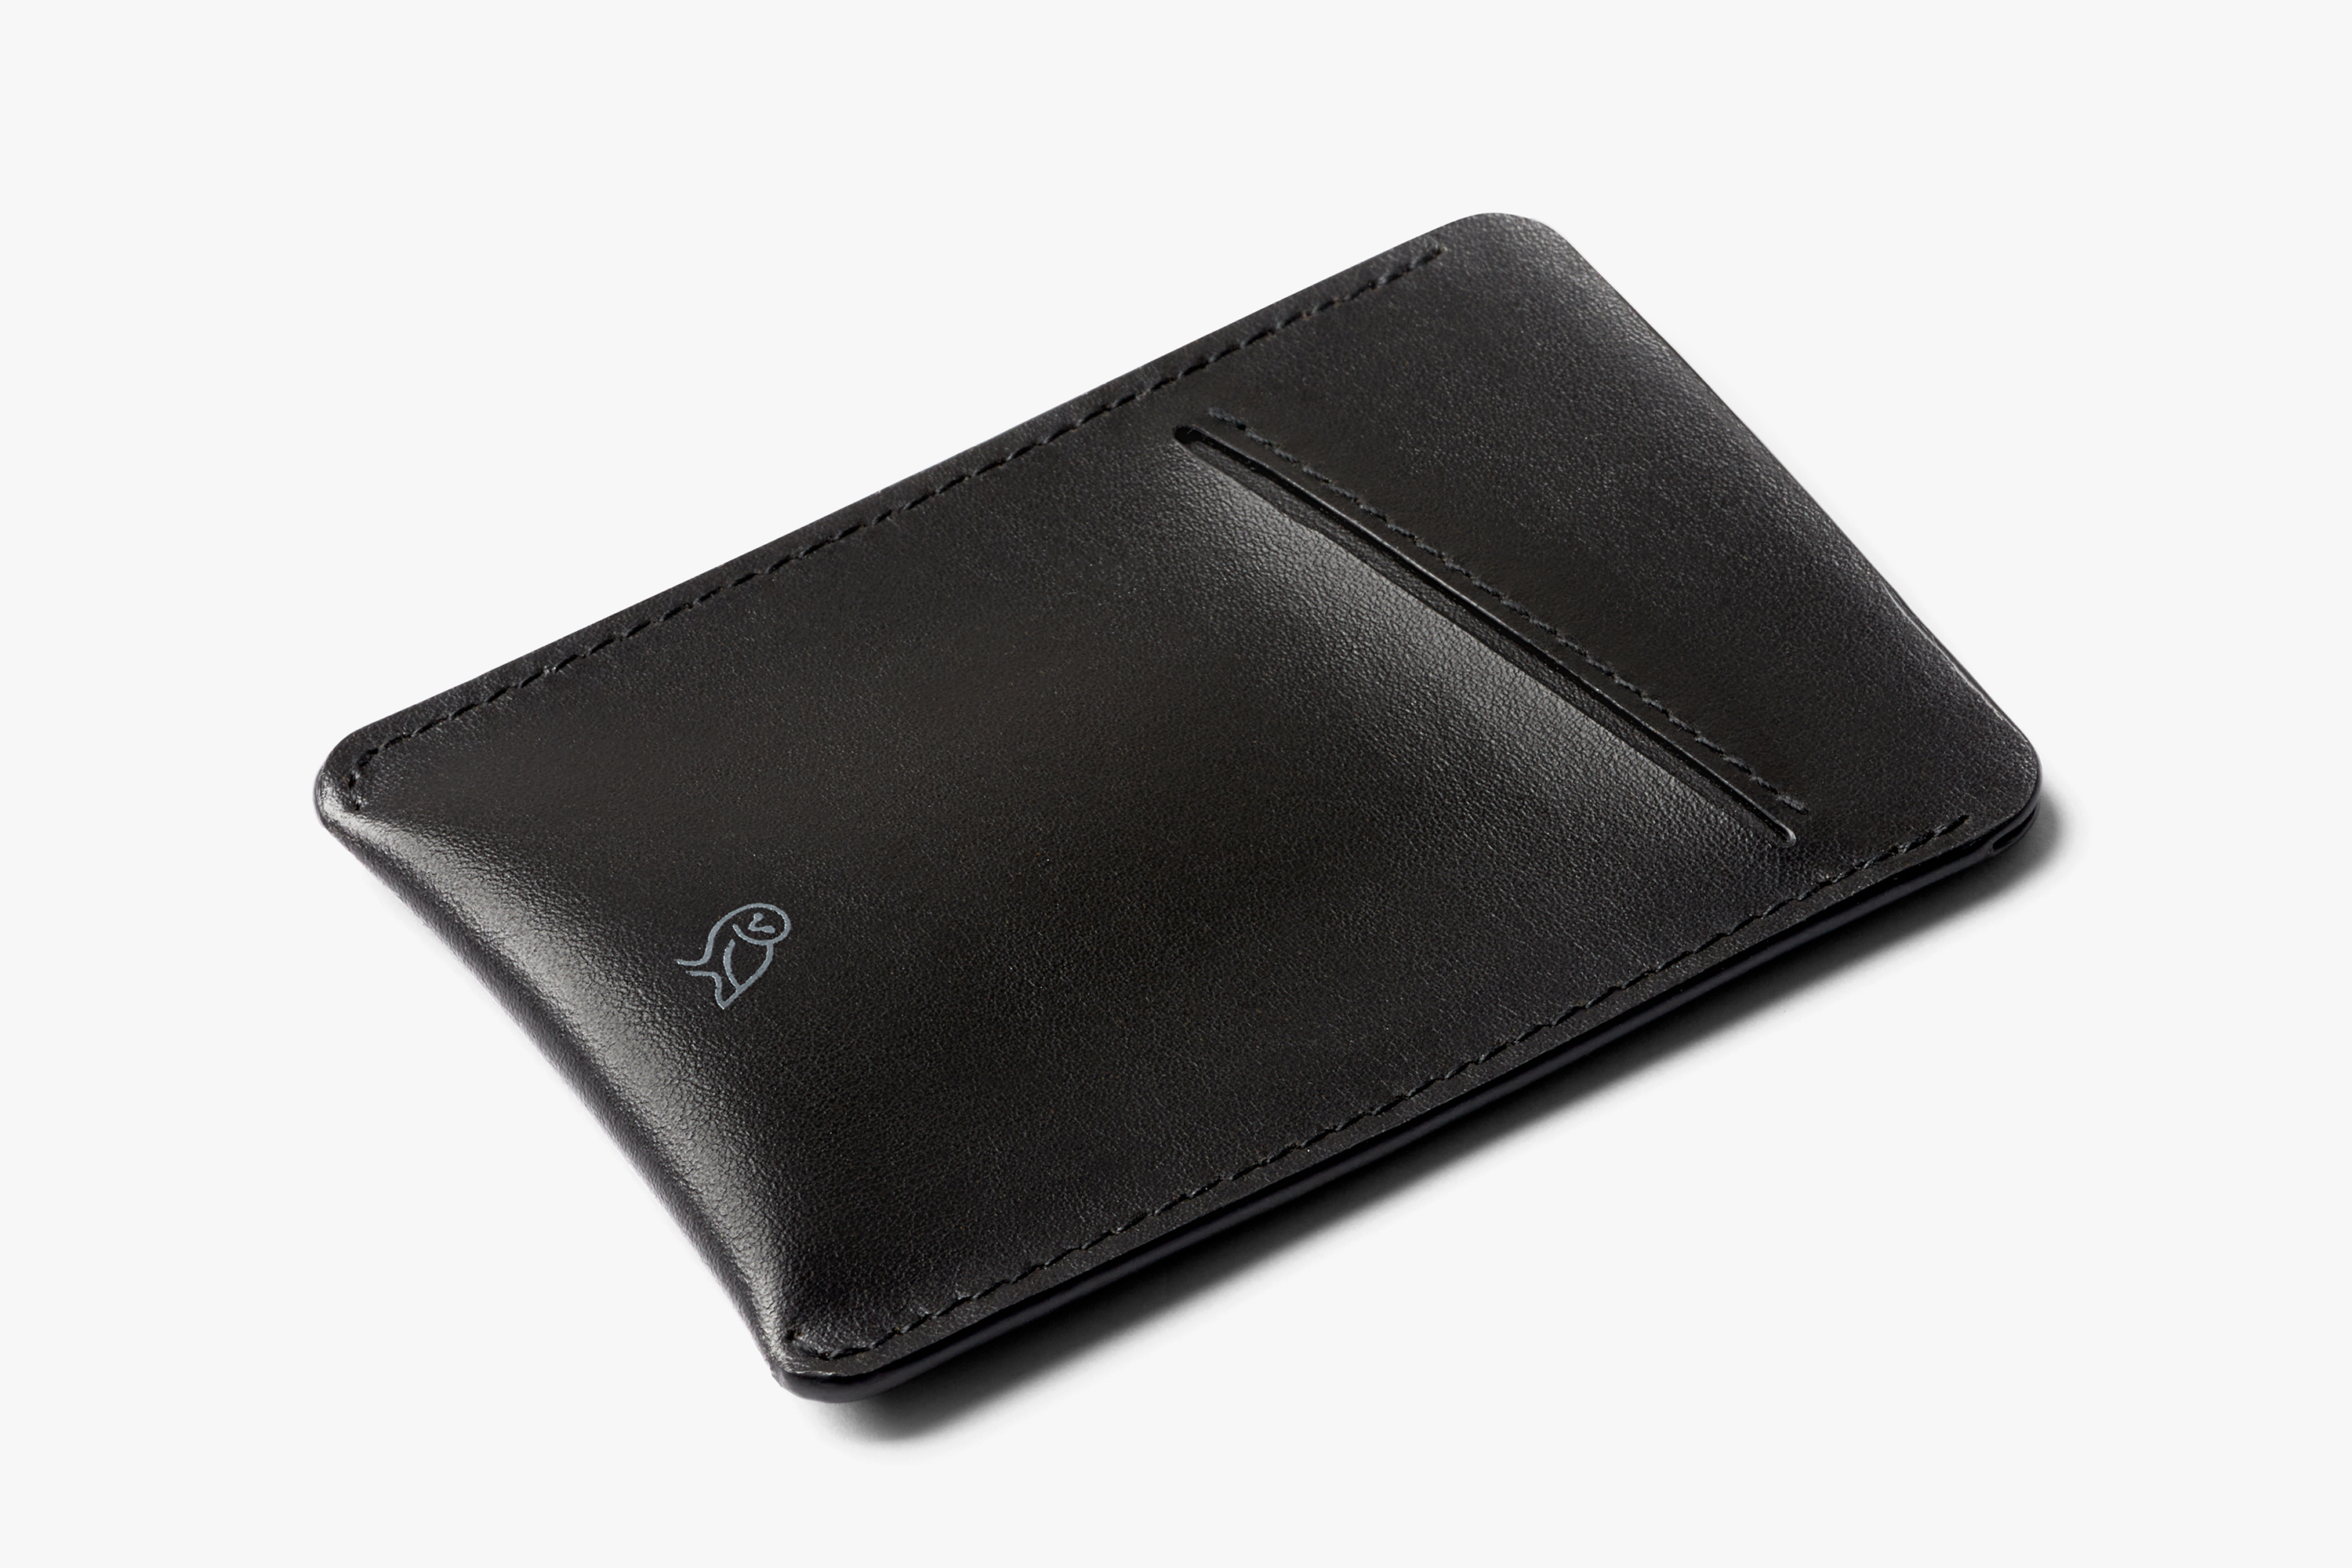 Apex Coins  Personal cards, Card holder leather, Cards